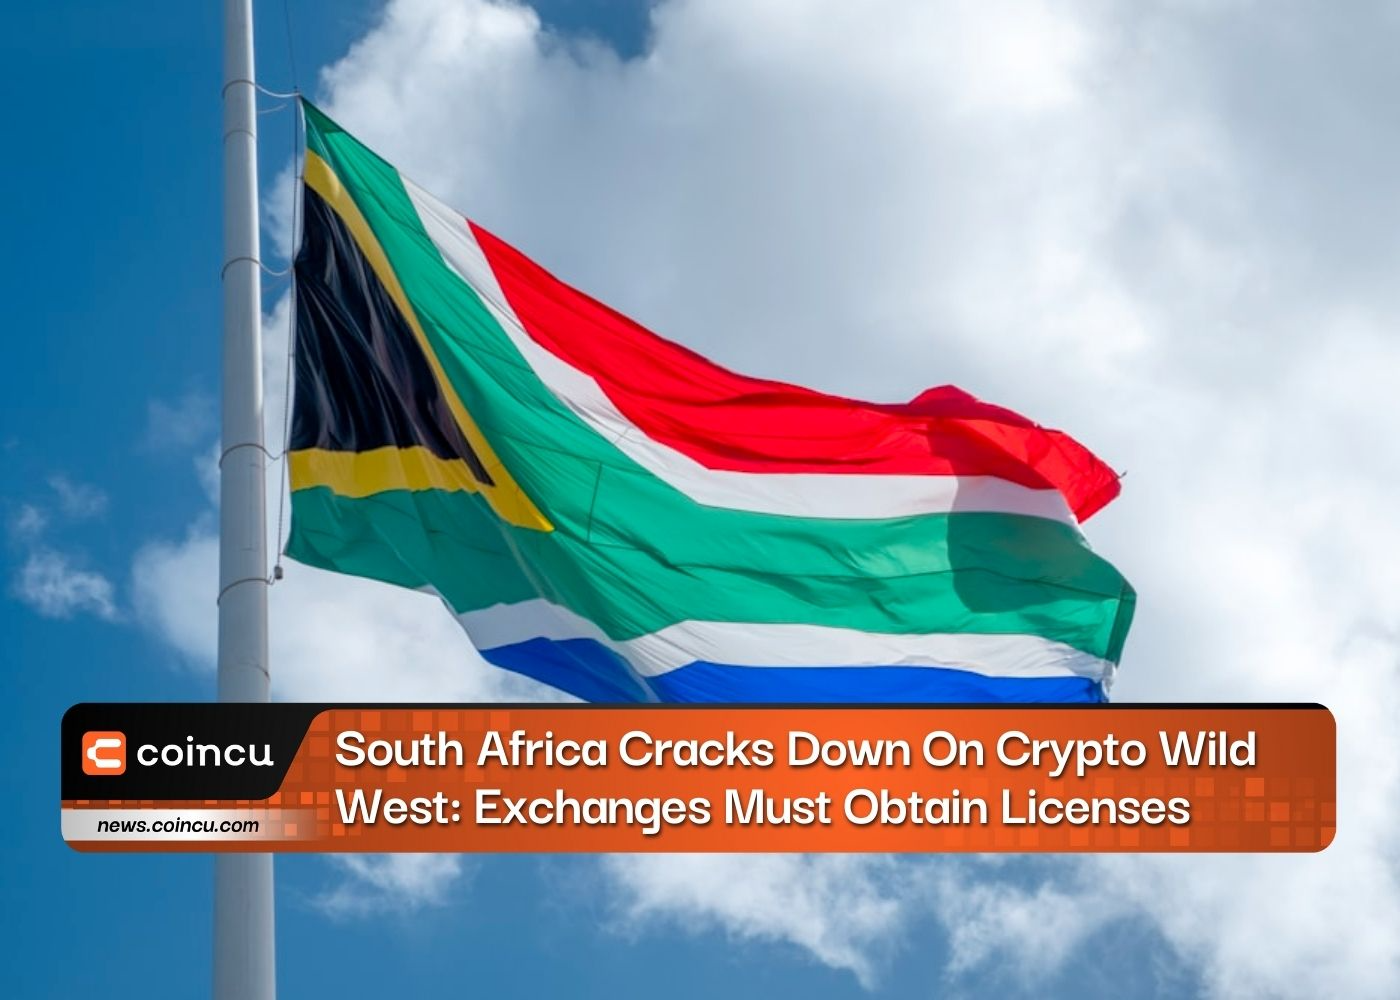 South Africa Cracks Down On Crypto Wild West: Exchanges Must Obtain Licenses